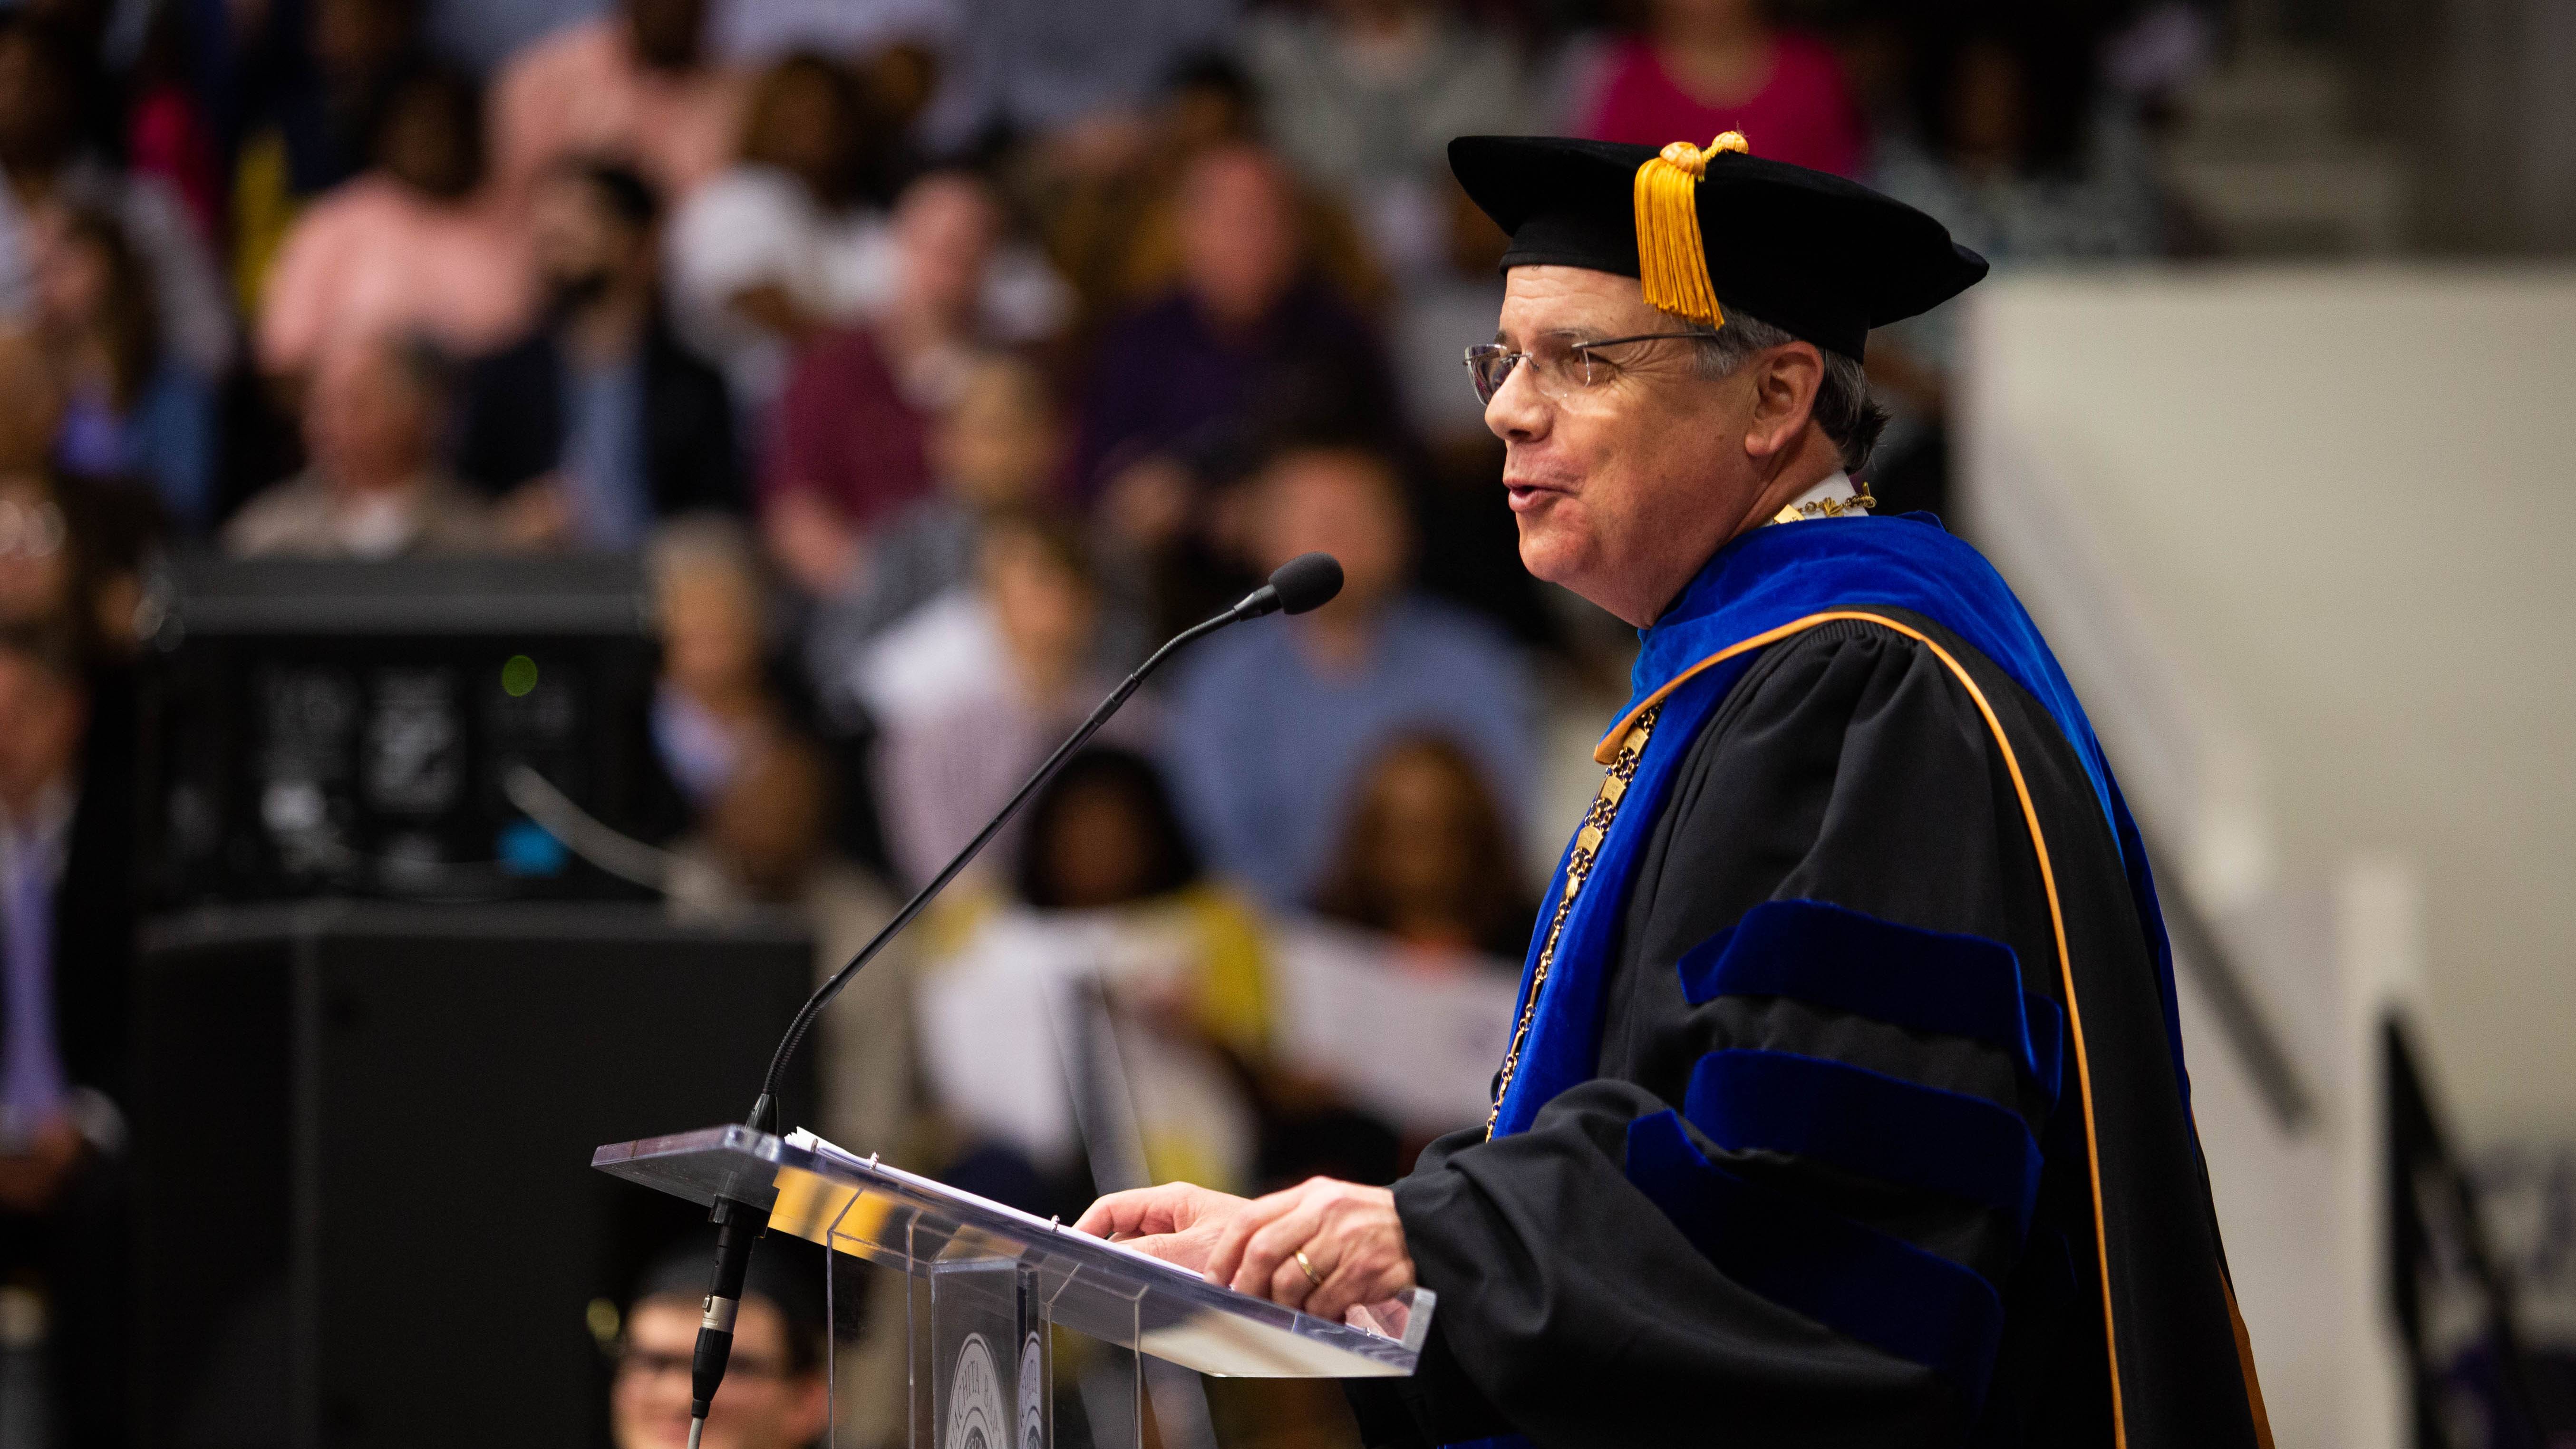 Dr. Sells' commencement address